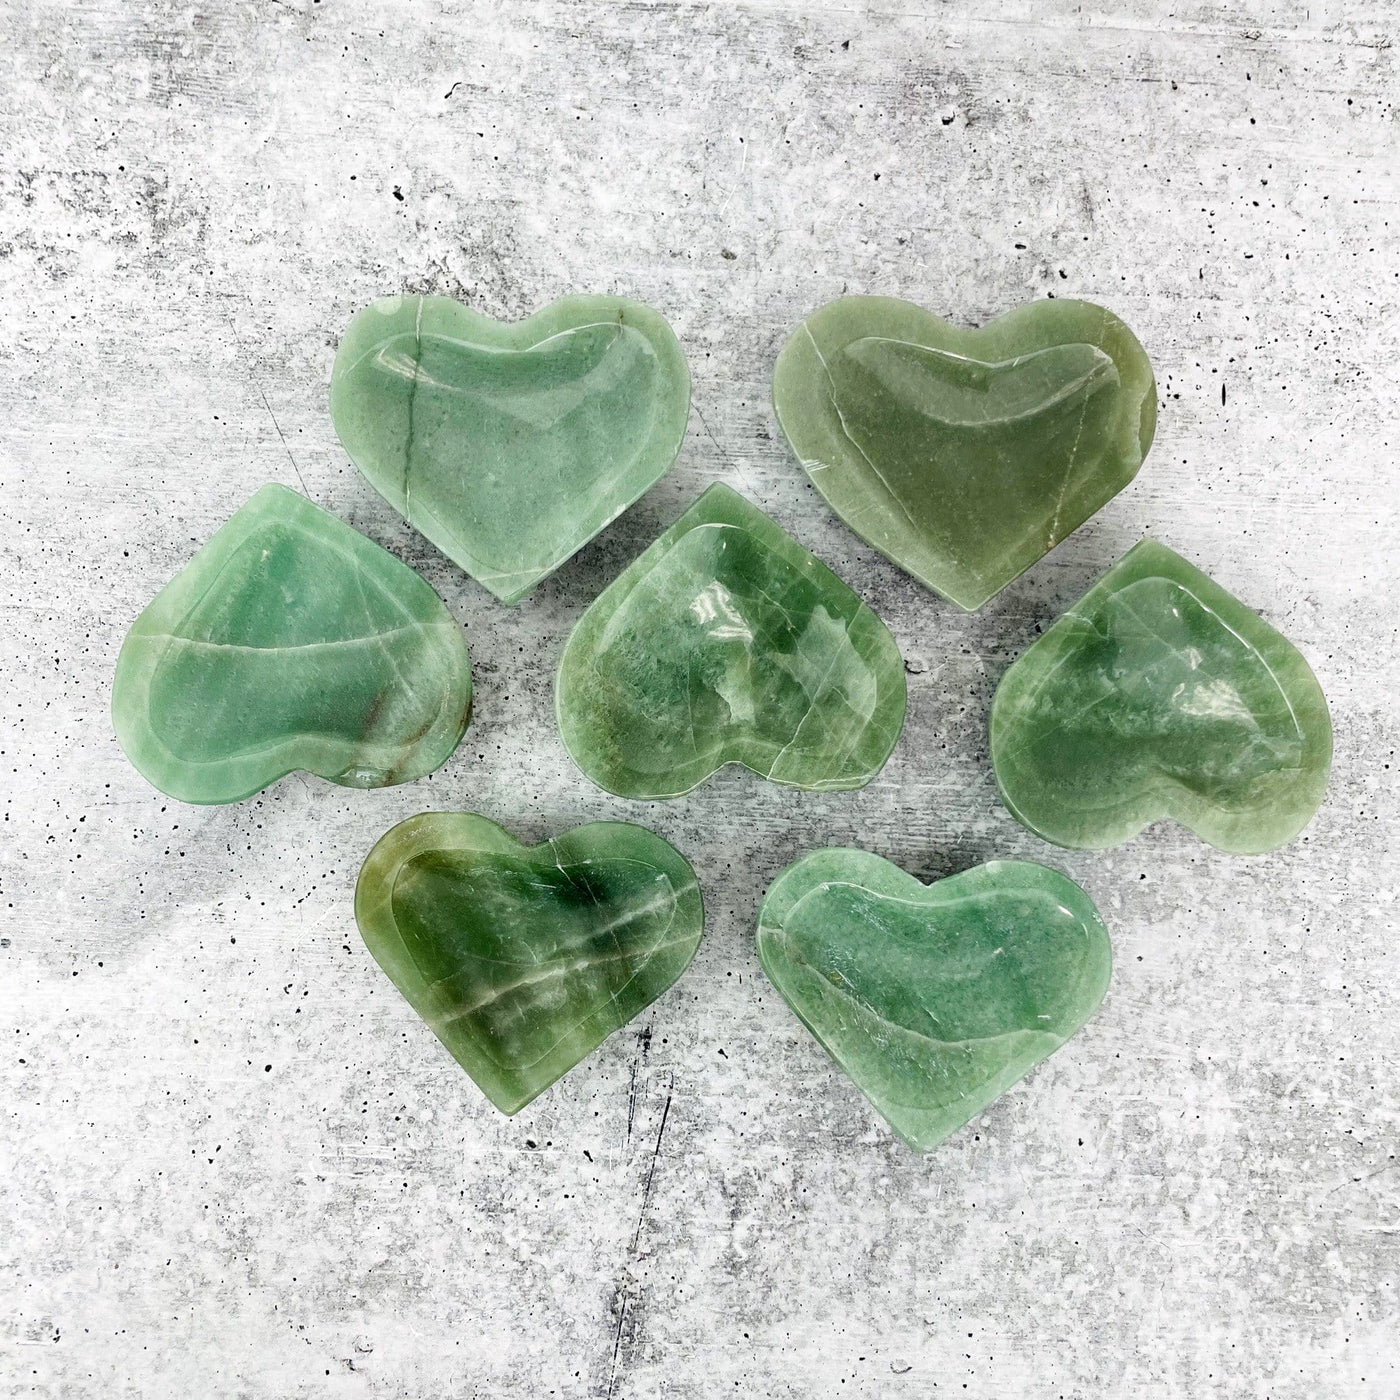 multiple Green Aventurine Stone Heart Dishes top view on grey white background